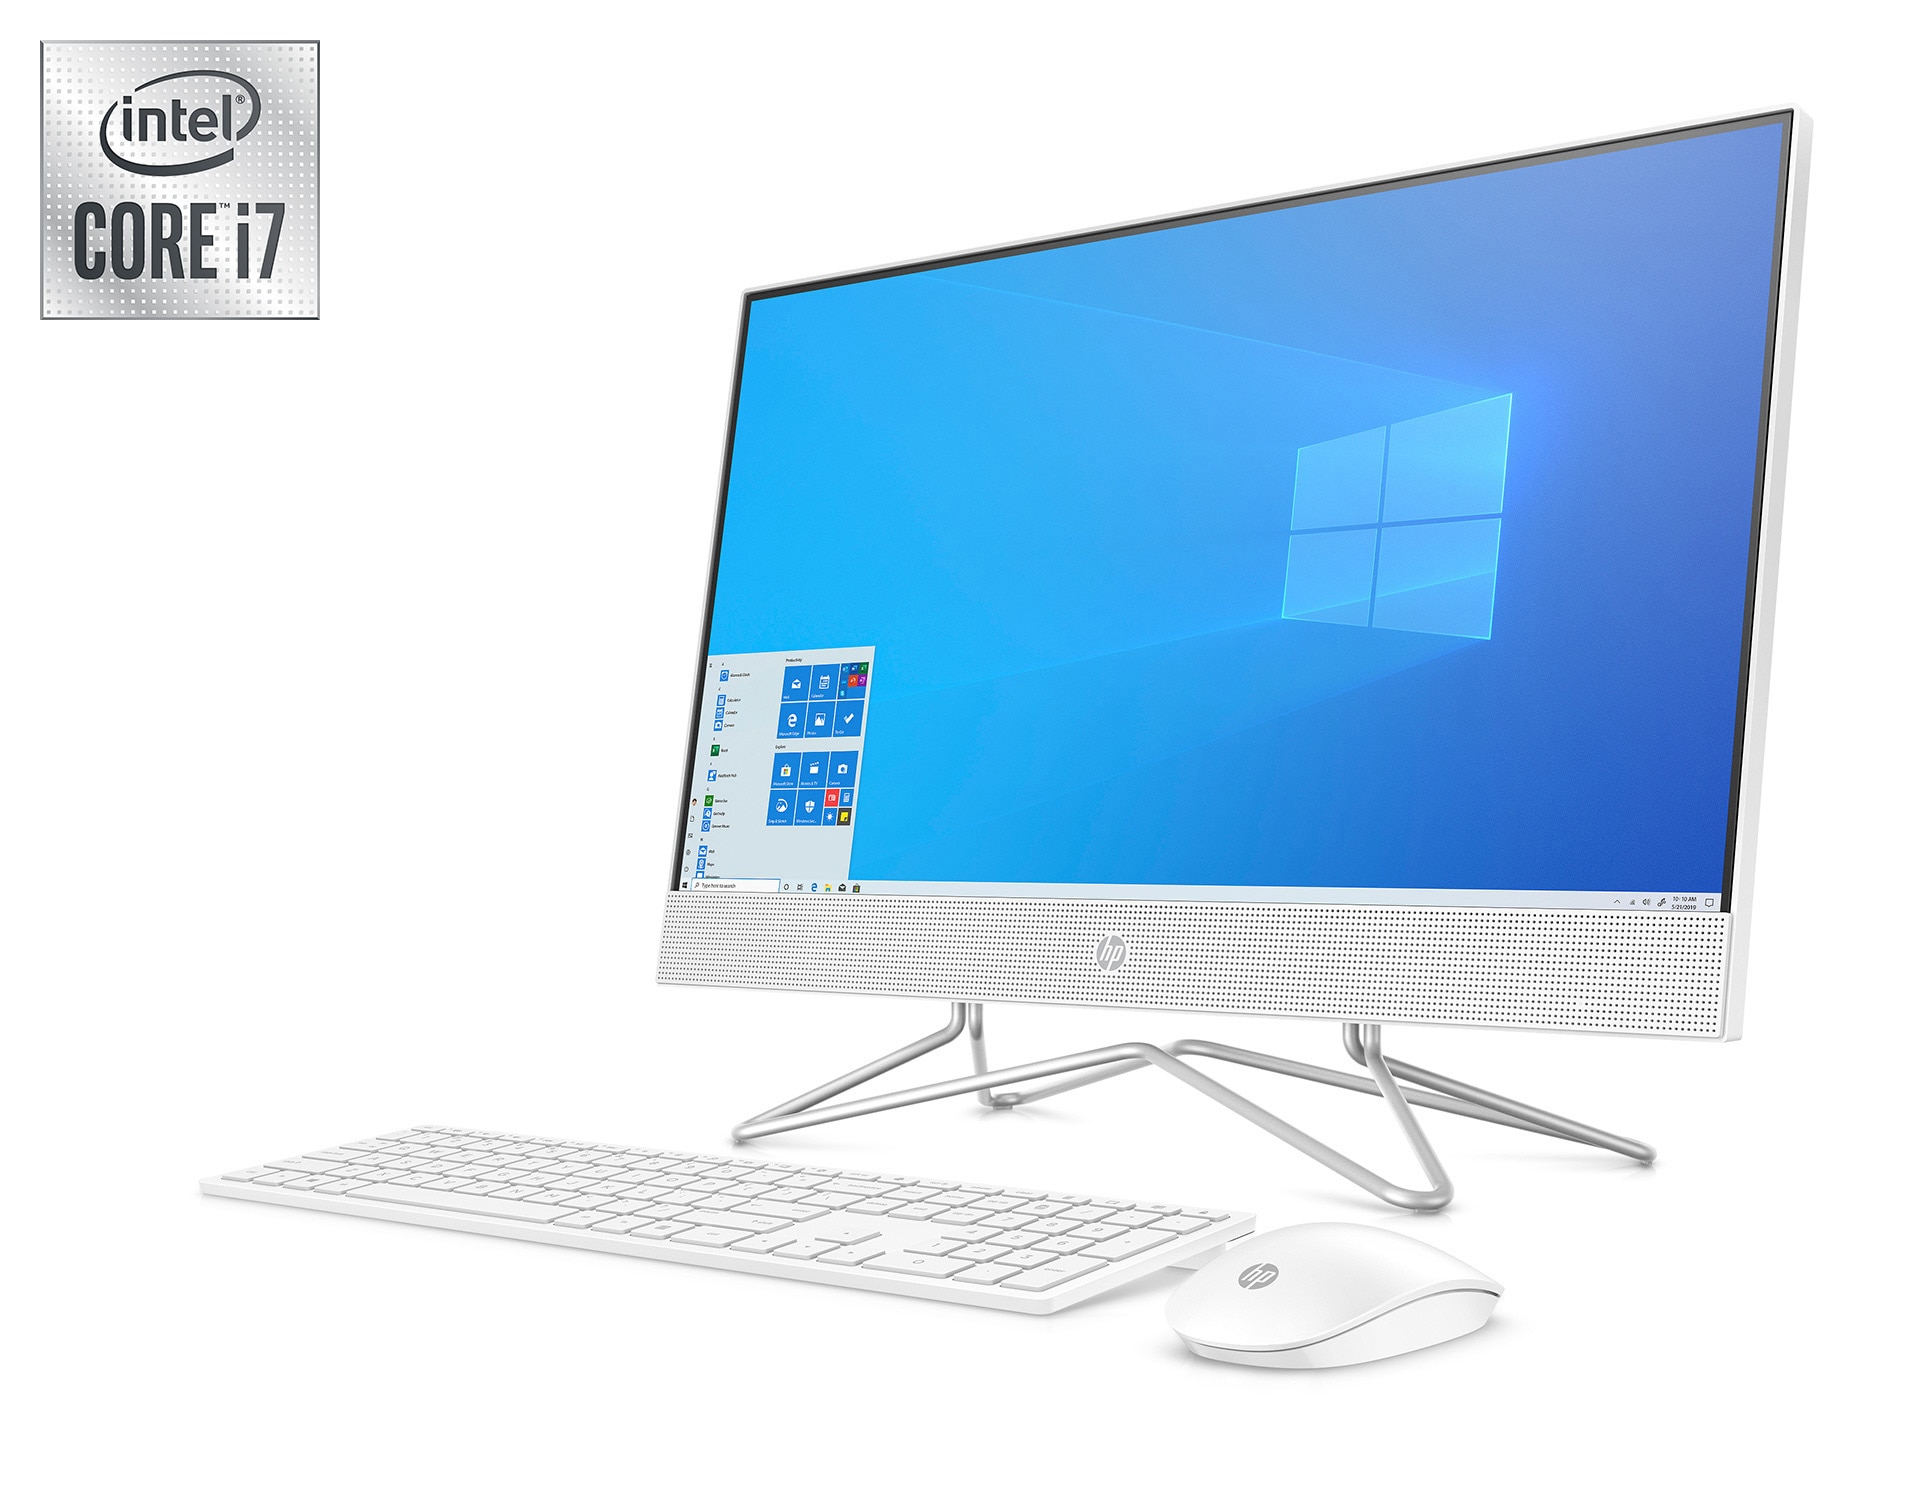 HP All-in-One 24-df 製品詳細 - デスクトップパソコン | 日本HP